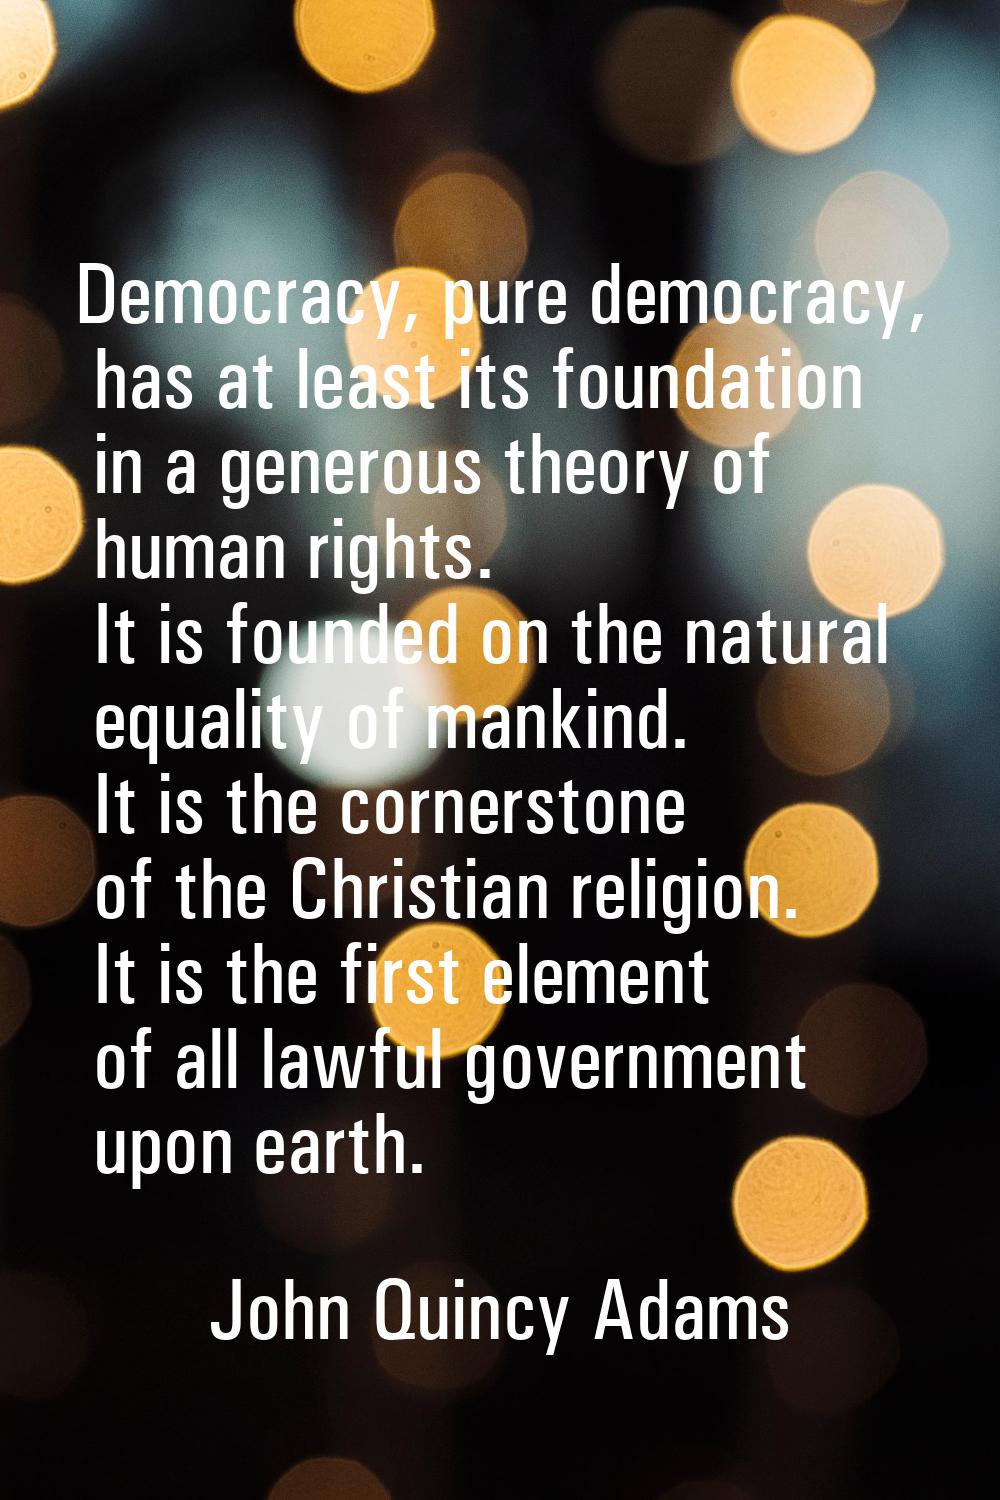 Democracy, pure democracy, has at least its foundation in a generous theory of human rights. It is 